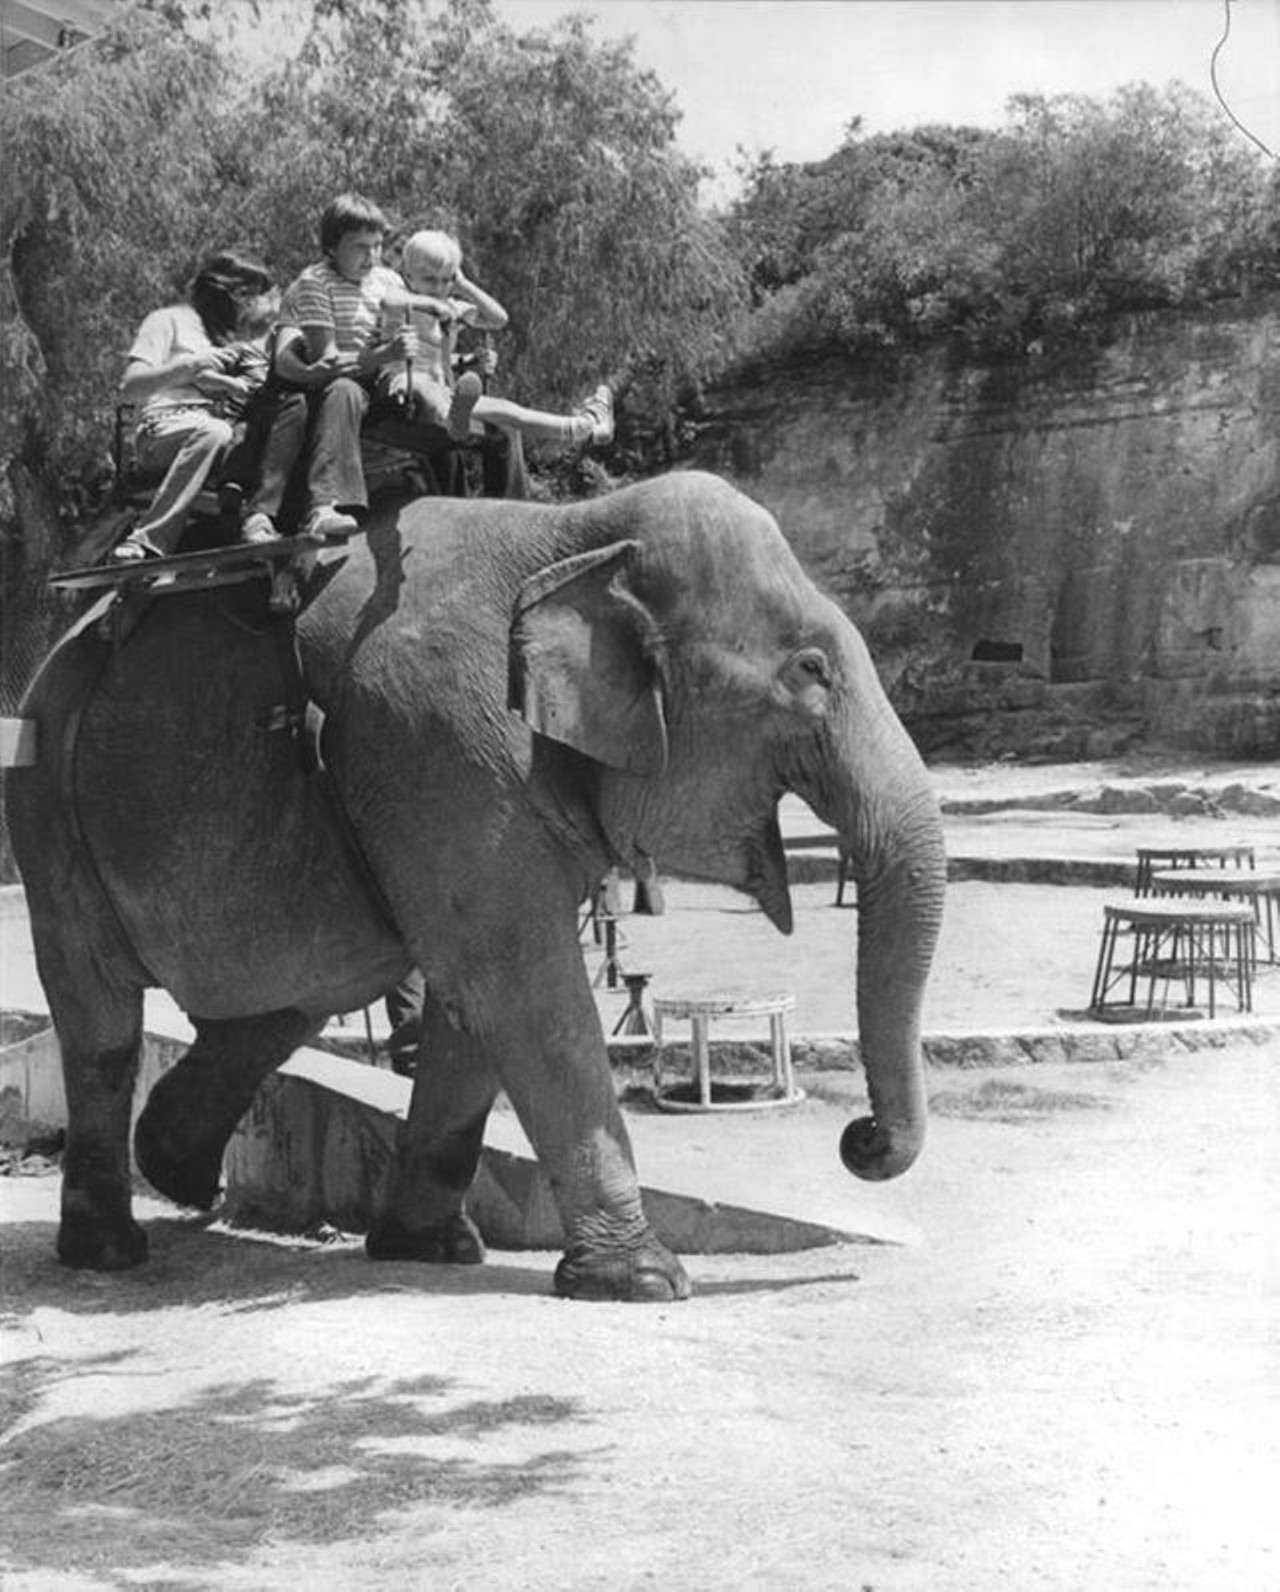 San Antonio Zoo
Before  San Antonio was home to one of the loneliest elephants in America, zoo visitors could ride the African animals in small groups. Let's fantasize about the unending array of possible reasons they had to stop offering these rides...
Vintage San Antonio